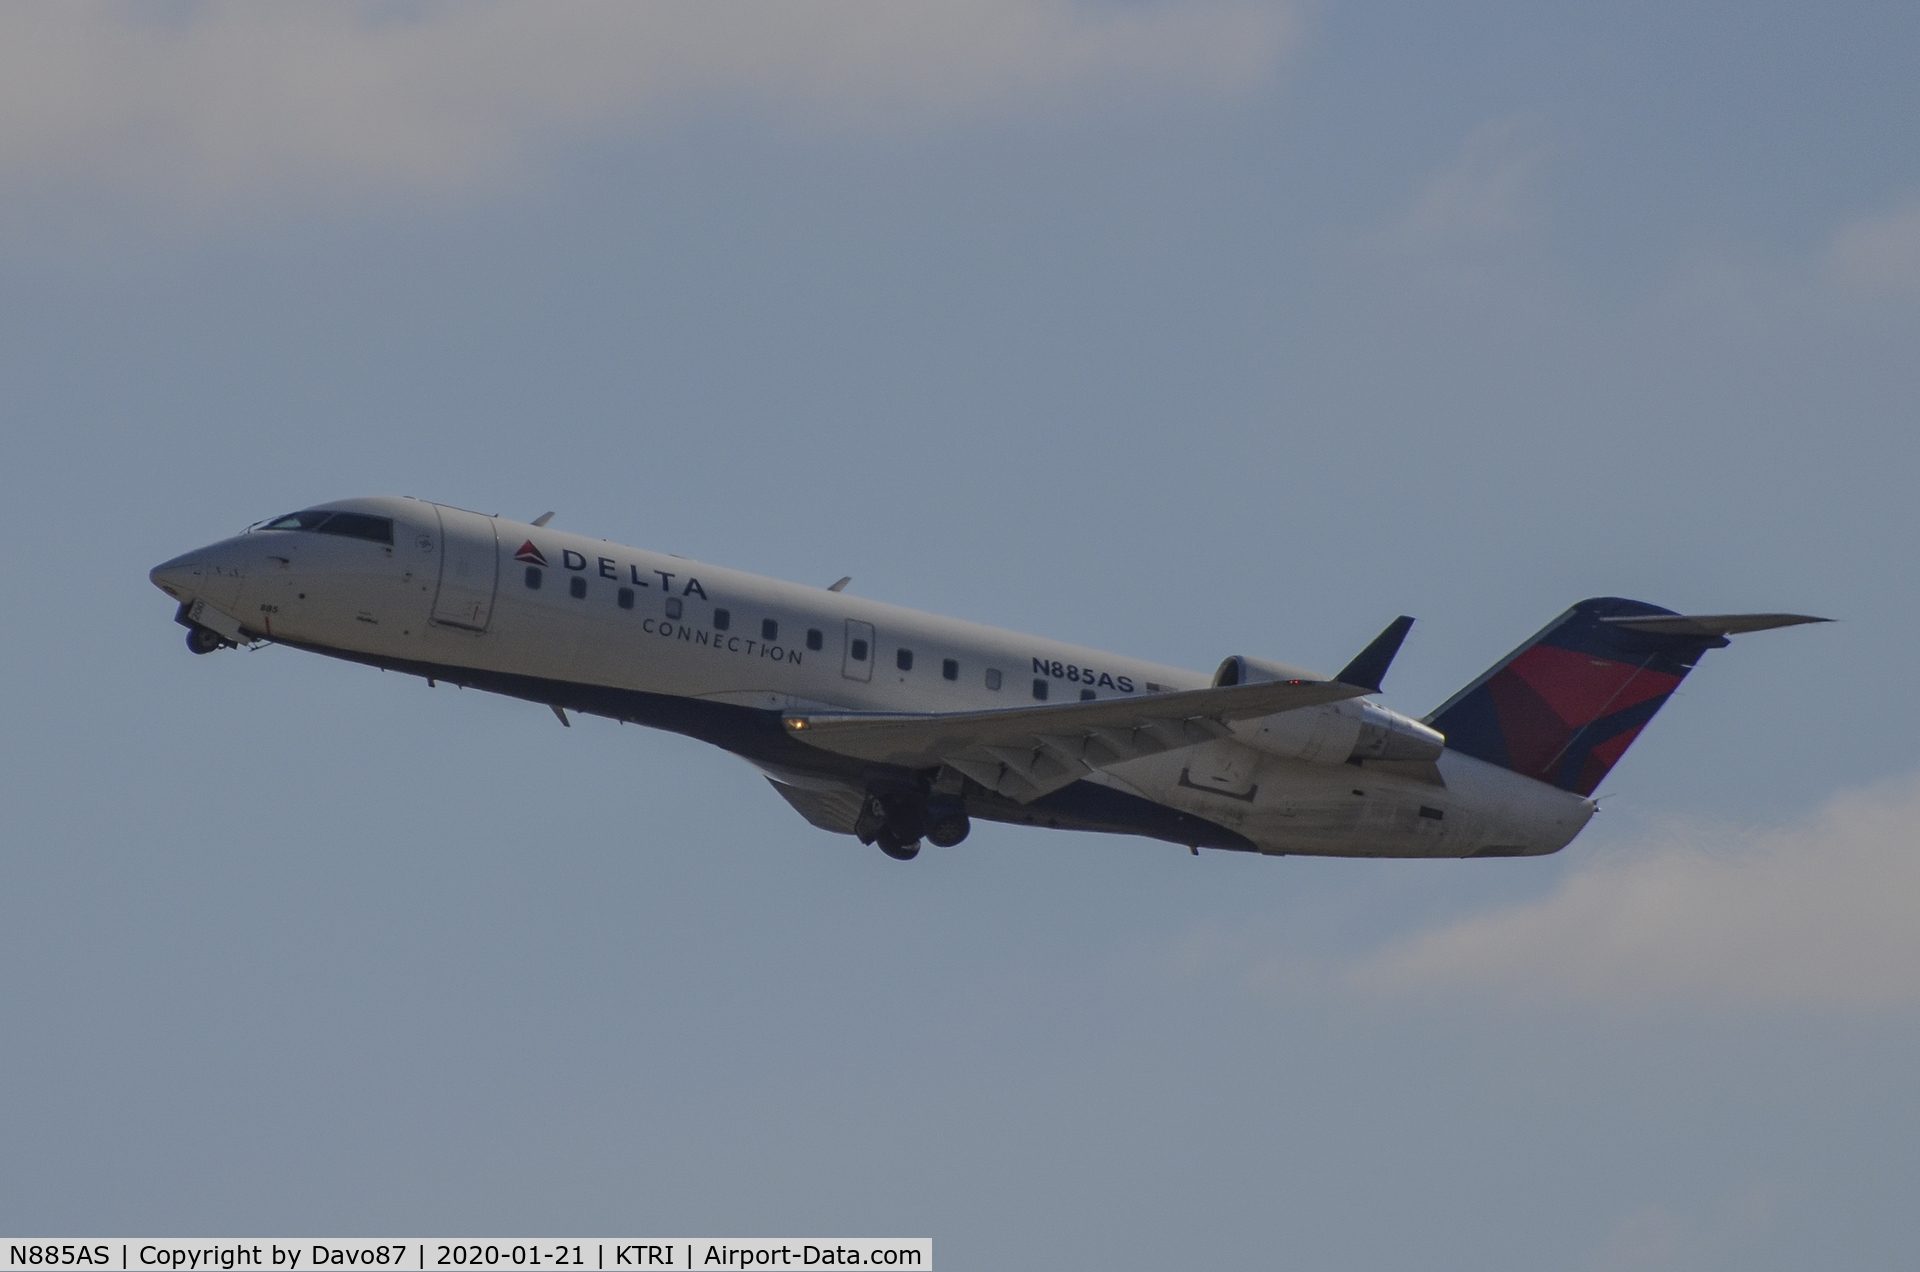 N885AS, 2001 Bombardier CRJ-200ER (CL-600-2B19) C/N 7521, Taking off from Tri-Cities Airport (KTRI) in East Tennessee.